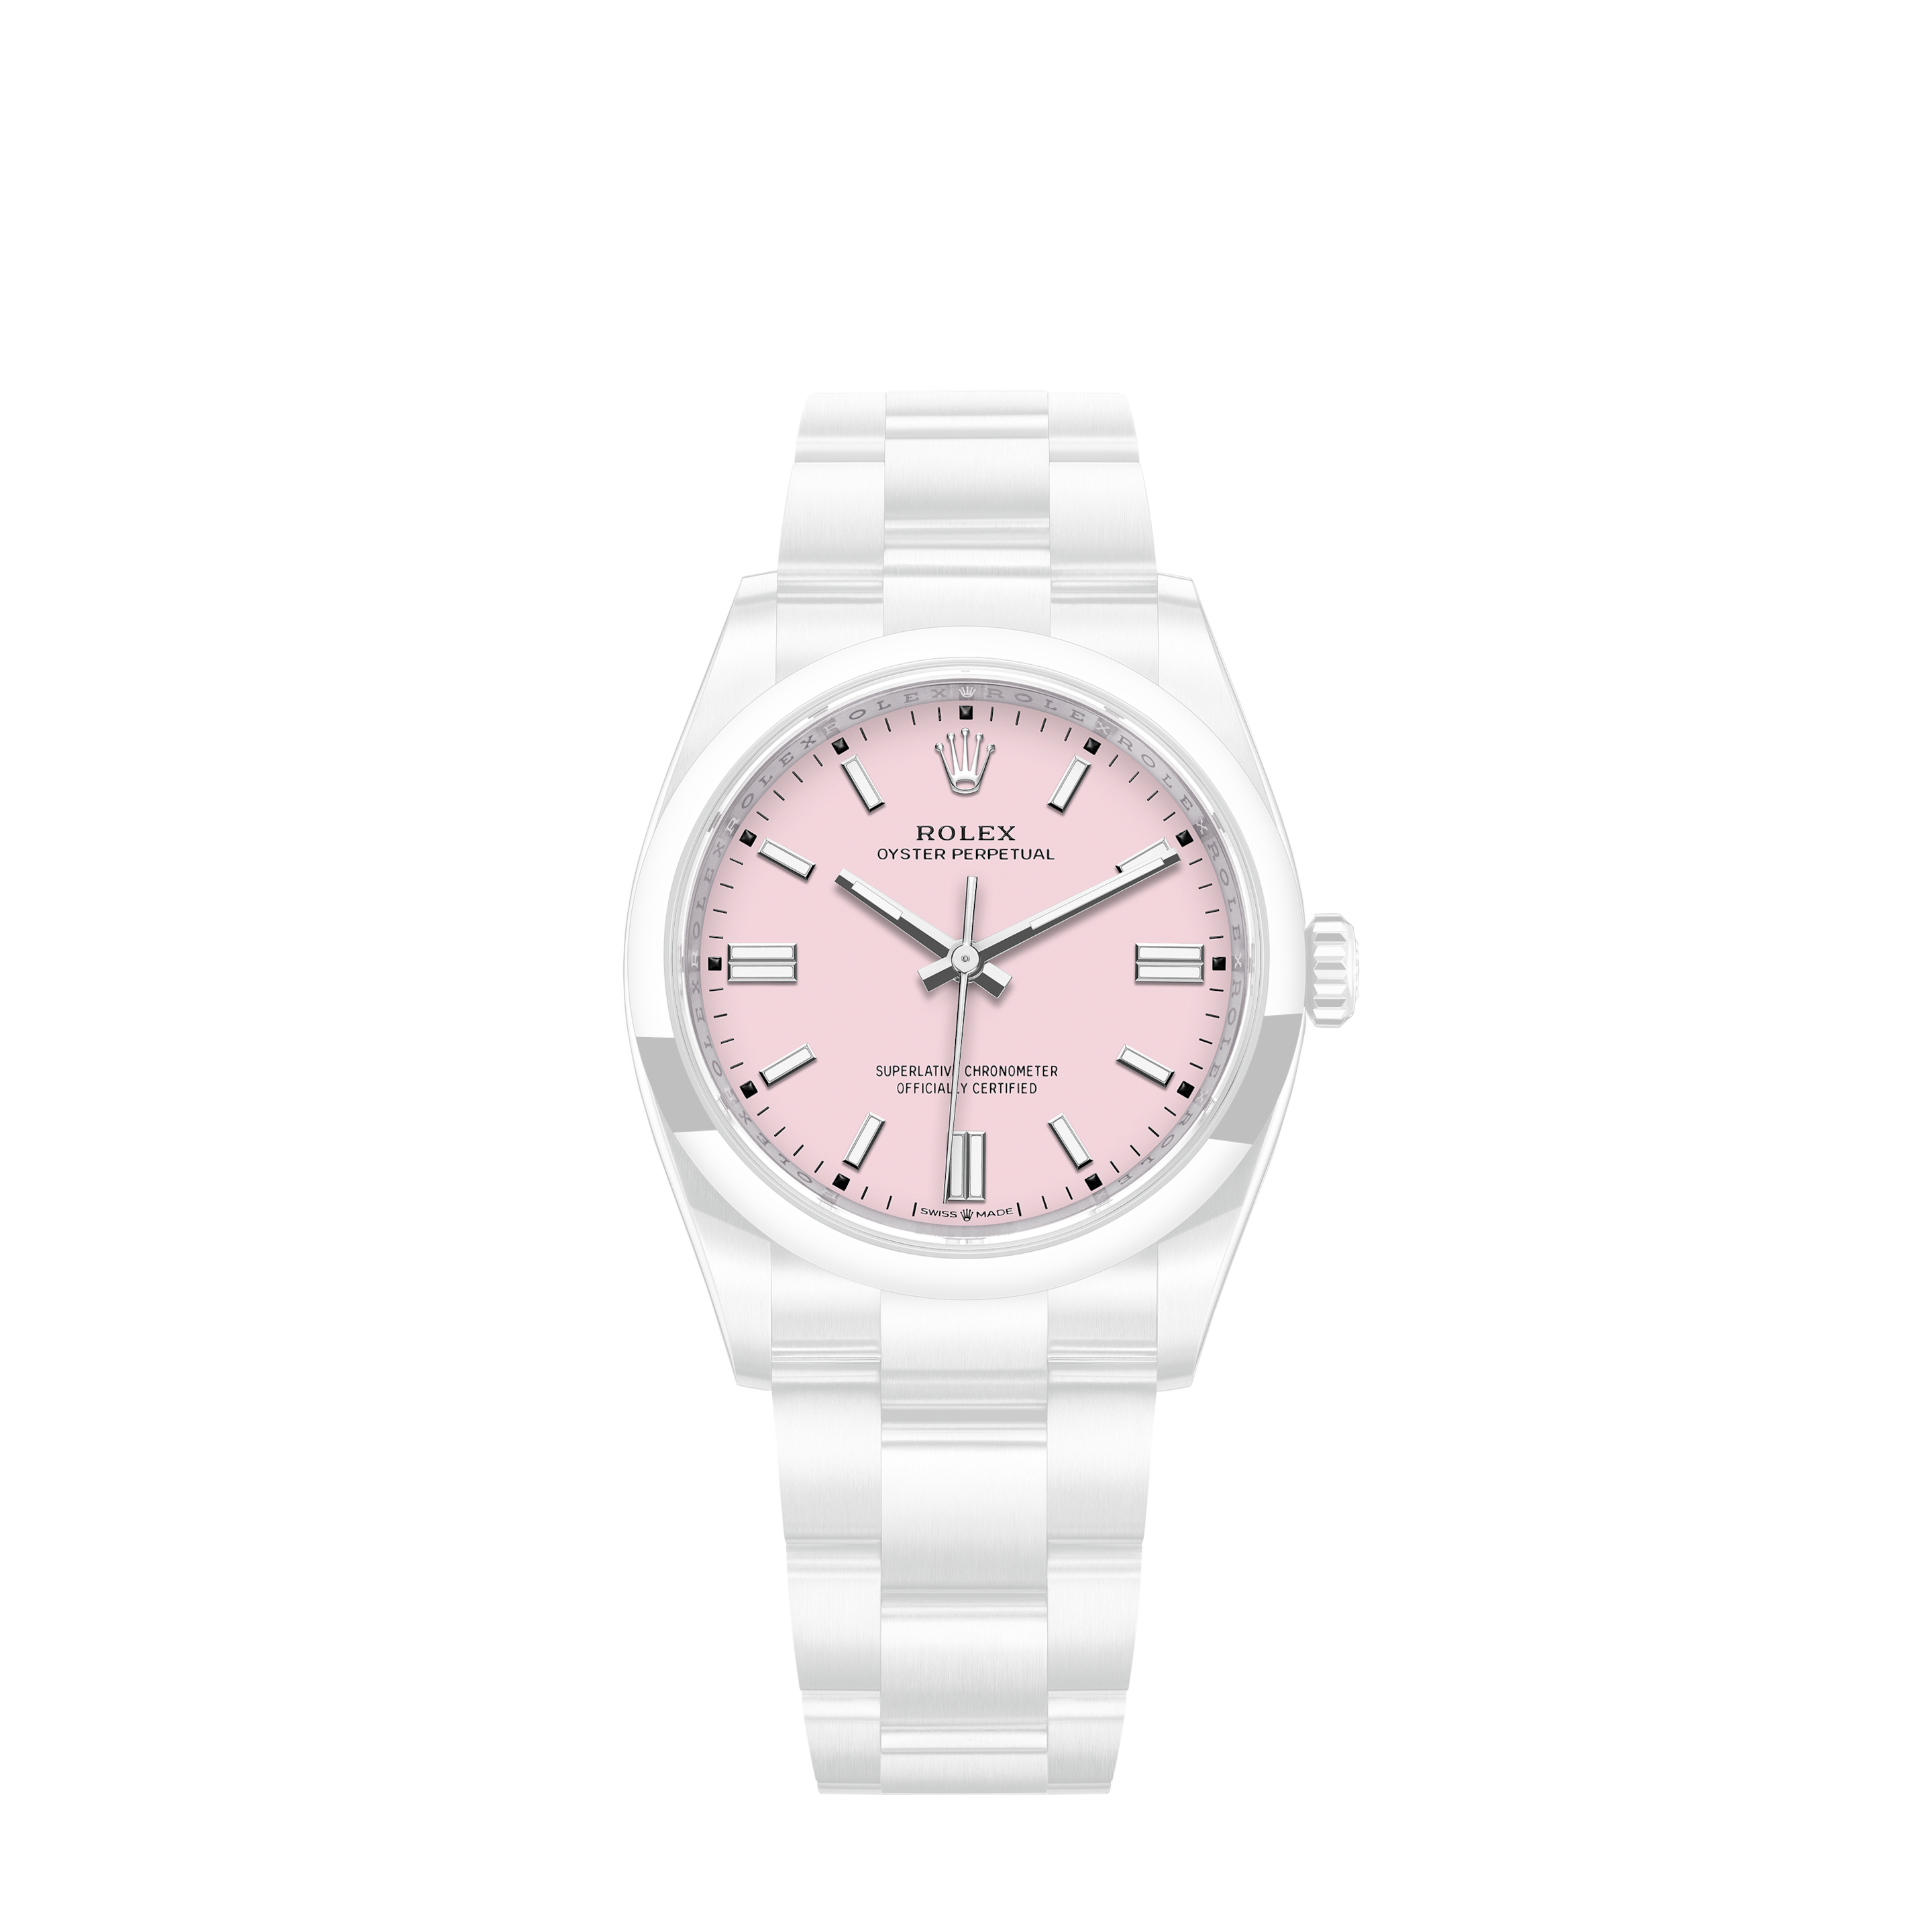 Rolex Military 'sas' Explorer Ii, Reference 216570 | A Stainless Steel Wristwatch With Date, 24 Hours Indication And Bracelet, Made For The Special A###Rolex Ladies Date 26 mm Two Tone Automatic Oyster Watch 69240 S Series 1993